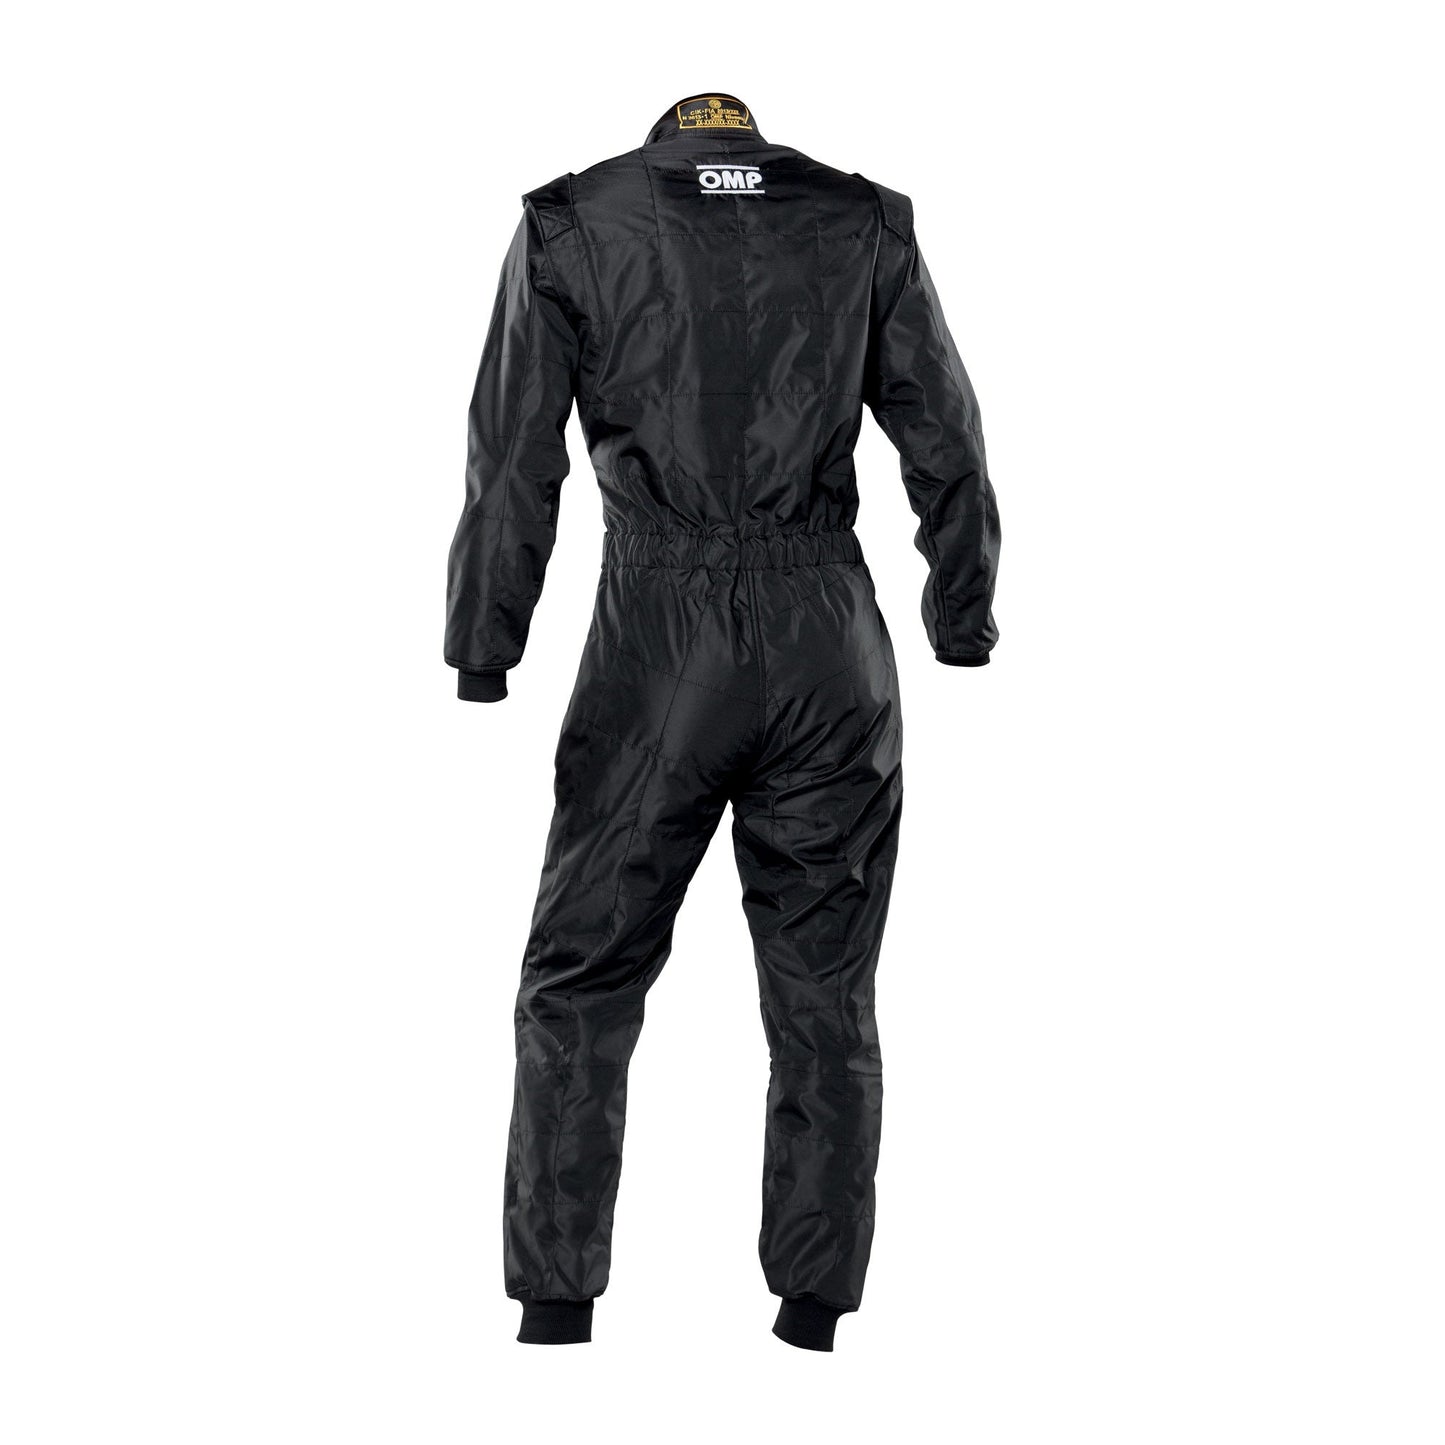 OMP Racing - OMP - Karting Suit - KS-4 (Adult & Children) DRIVEN | Performance Products